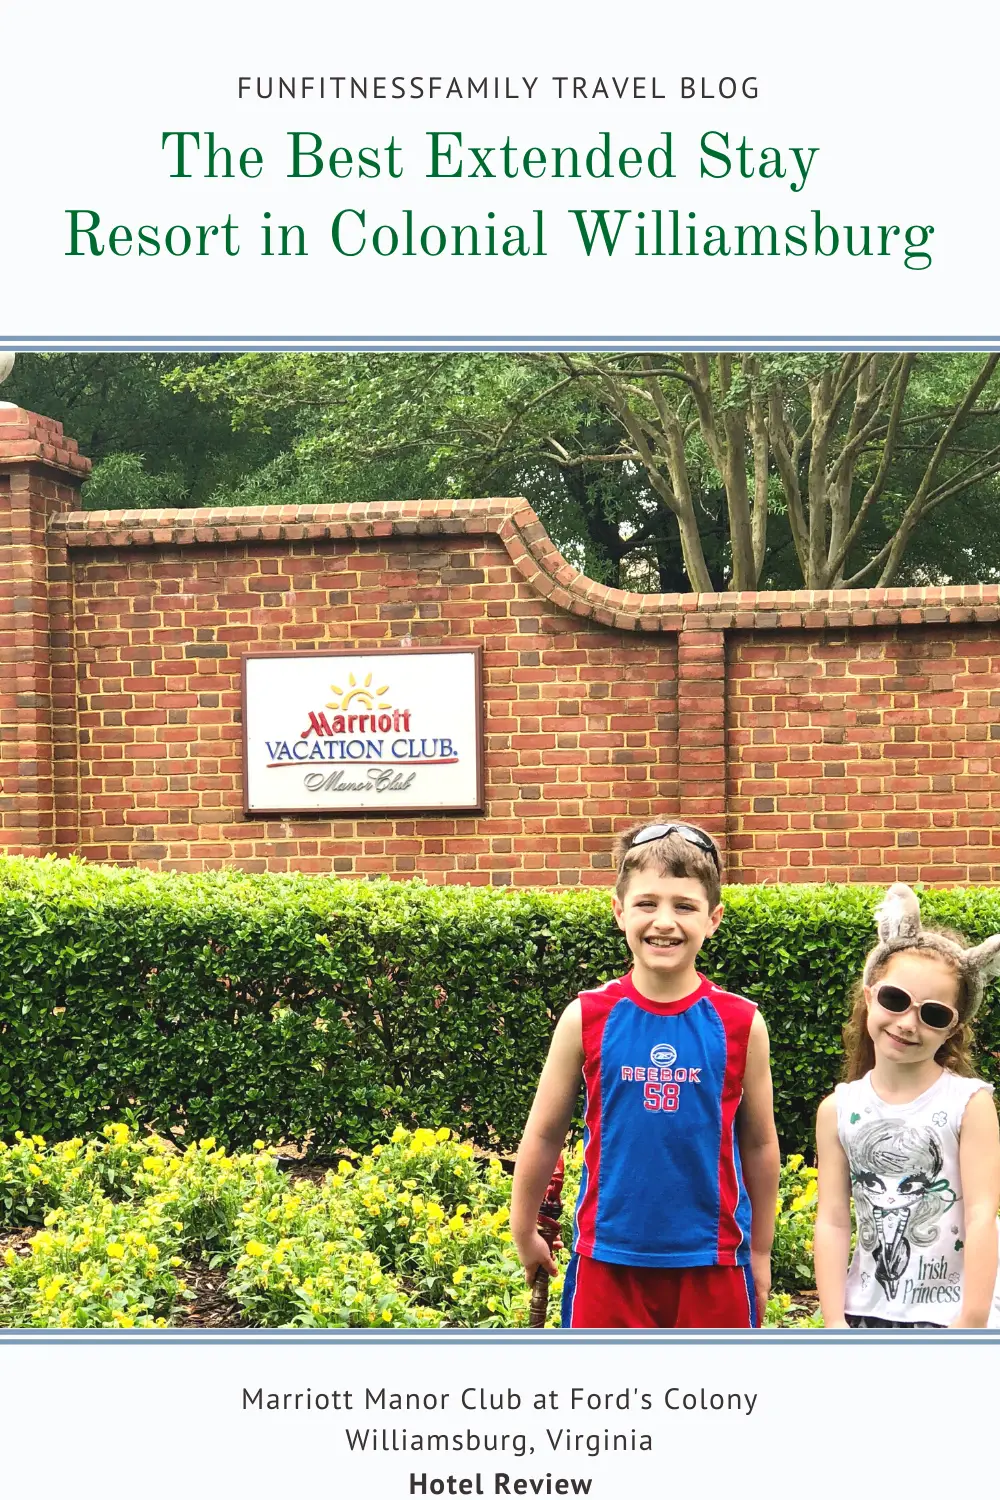 Find out why the amenity-rich Marriott Manor Club at Ford's Colony is ranked one of the top properties in the Williamsburg area! #williamsburgva #extendedstayhotels #familytravel #virginia